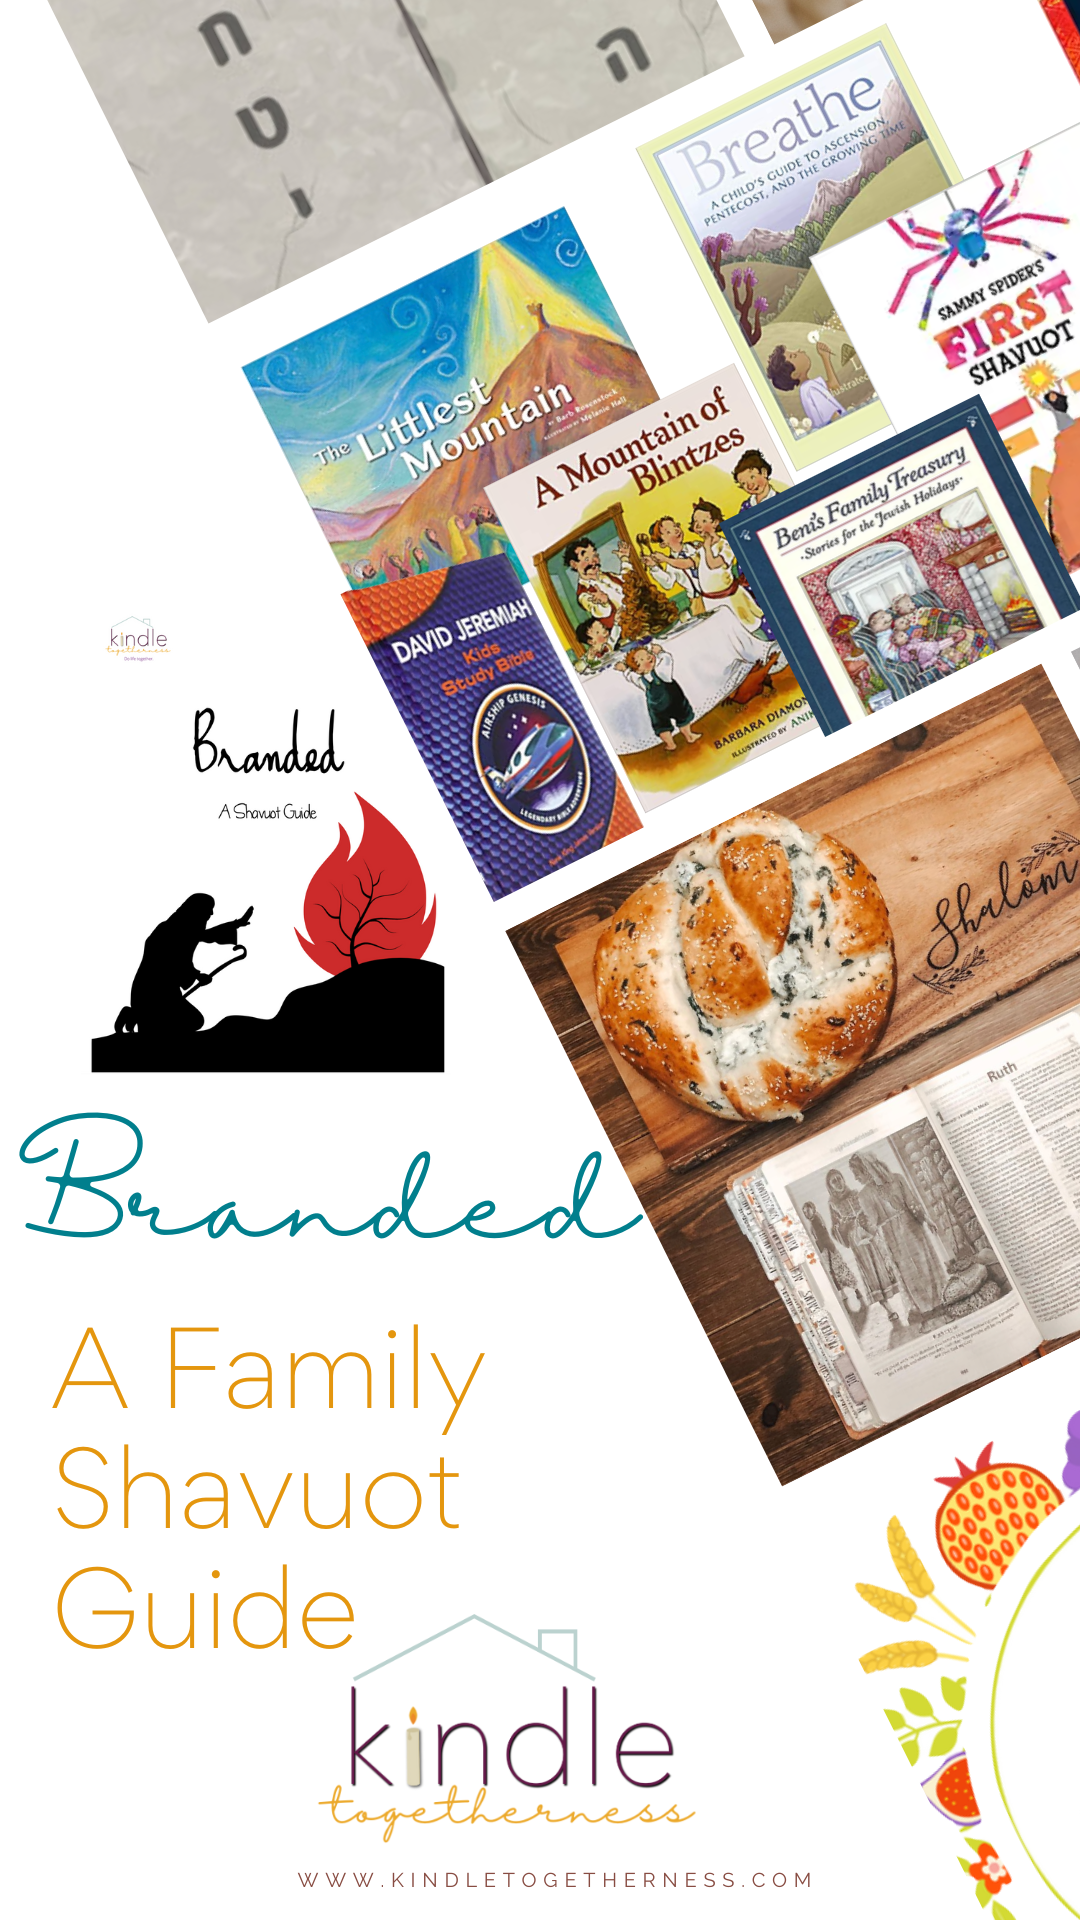 Branded - A Shavuot Guide